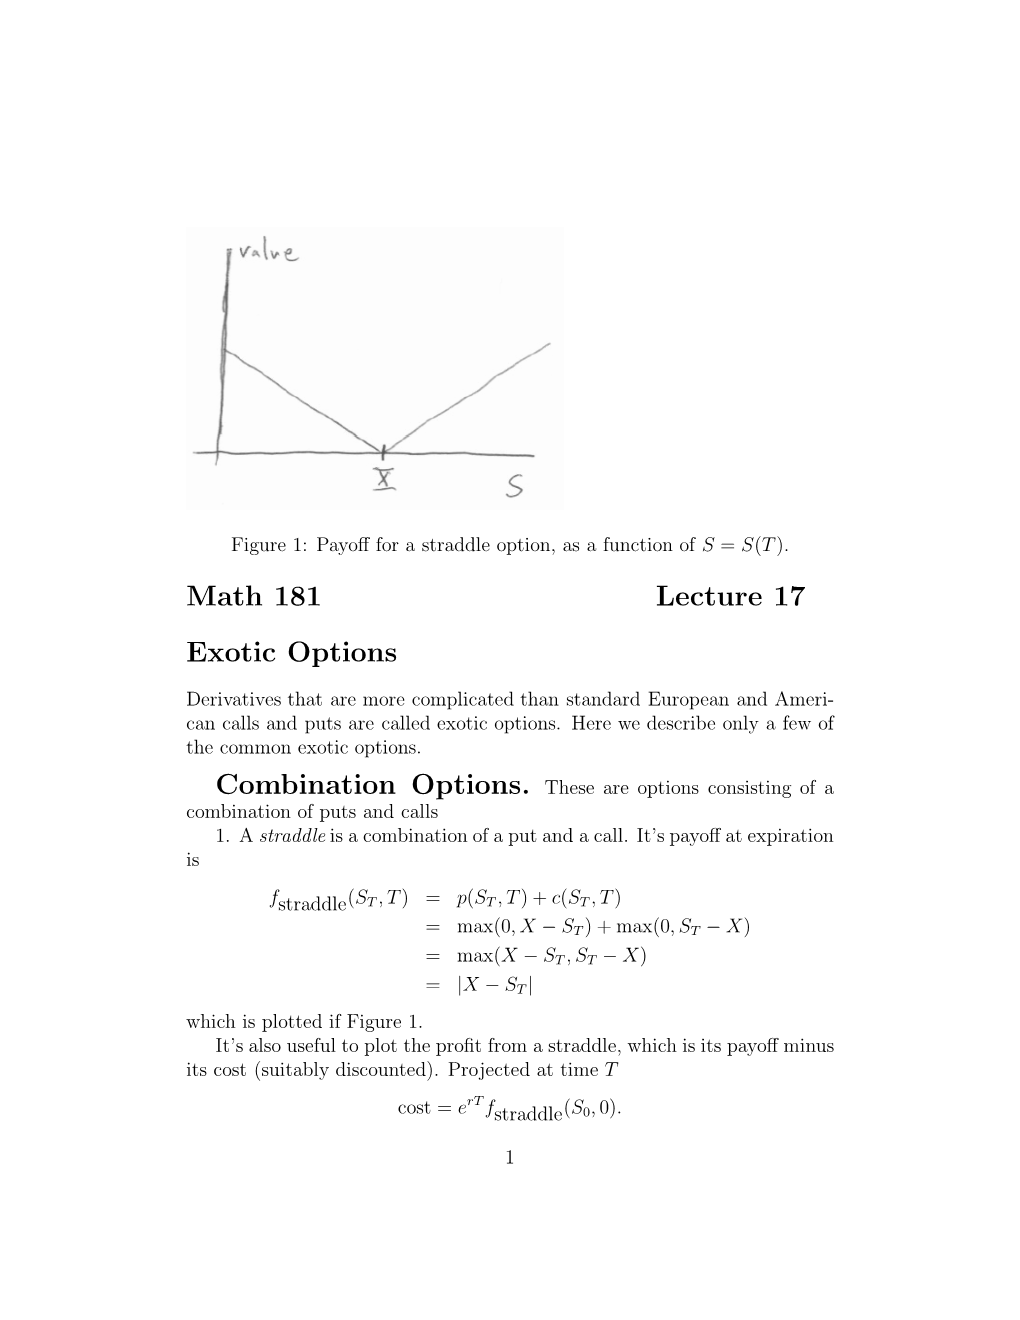 Math 181 Lecture 17 Exotic Options